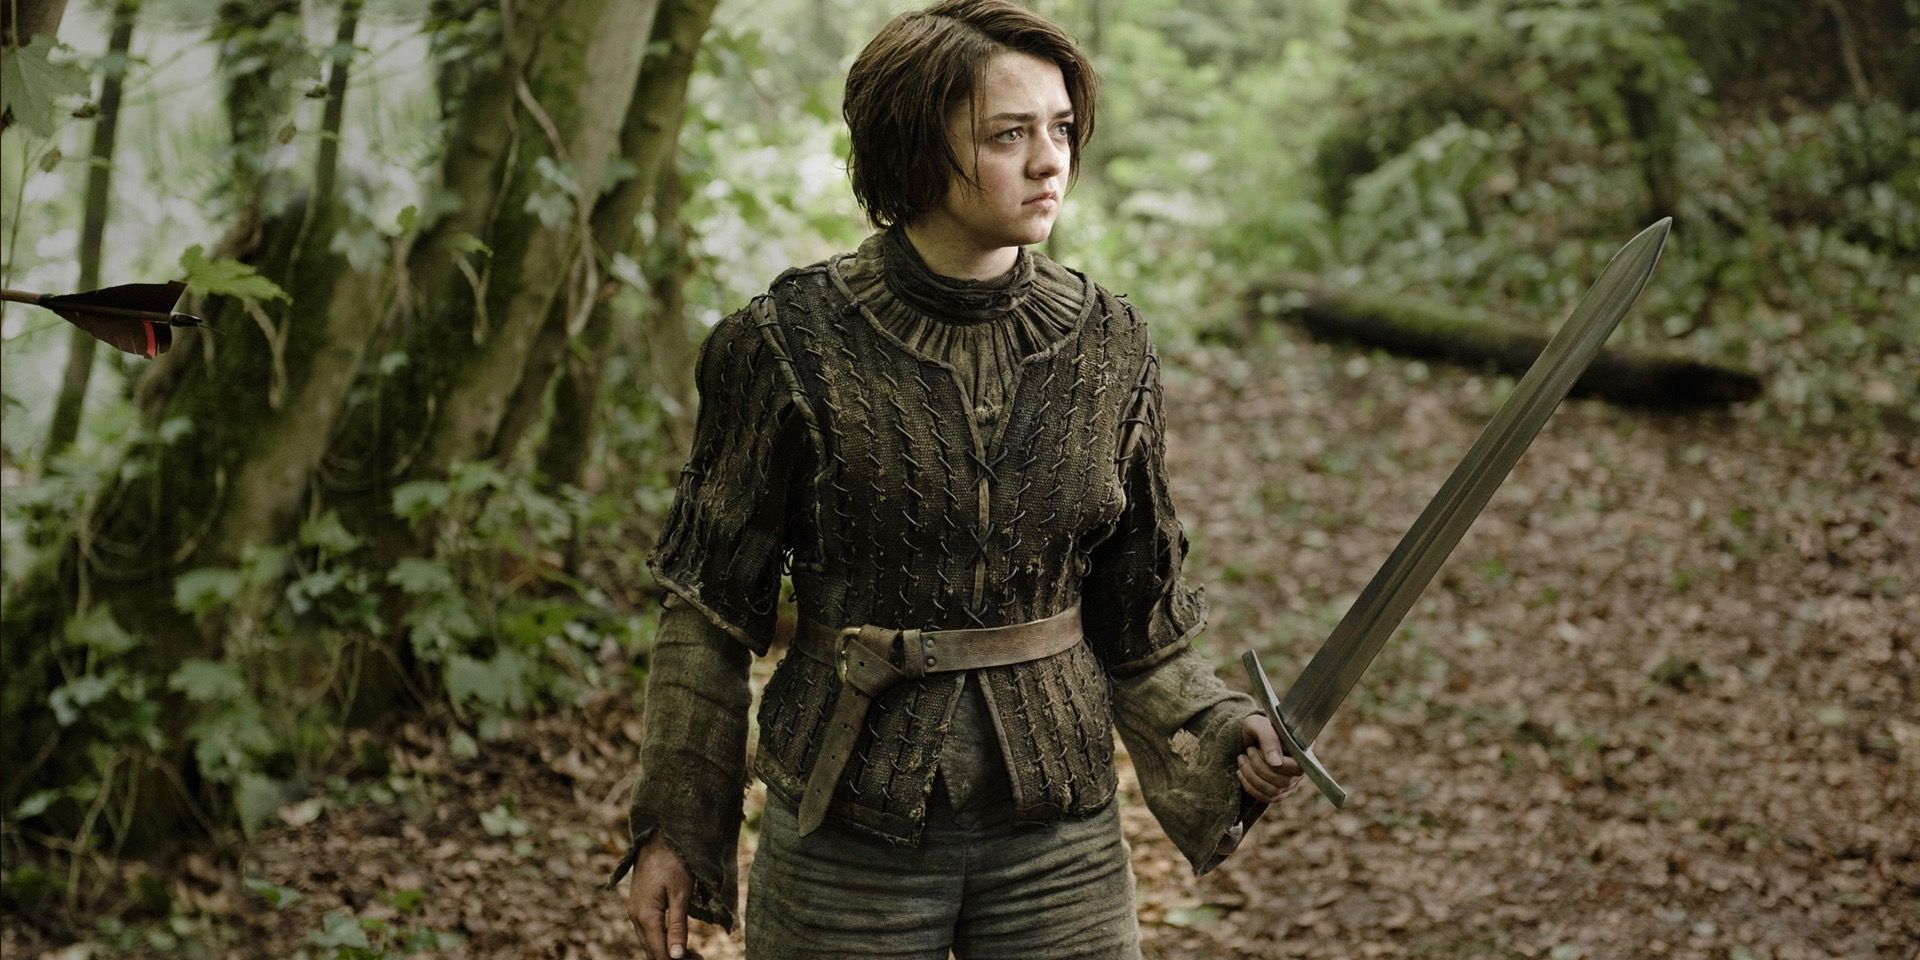 Maisie Williams in Game of Thonres